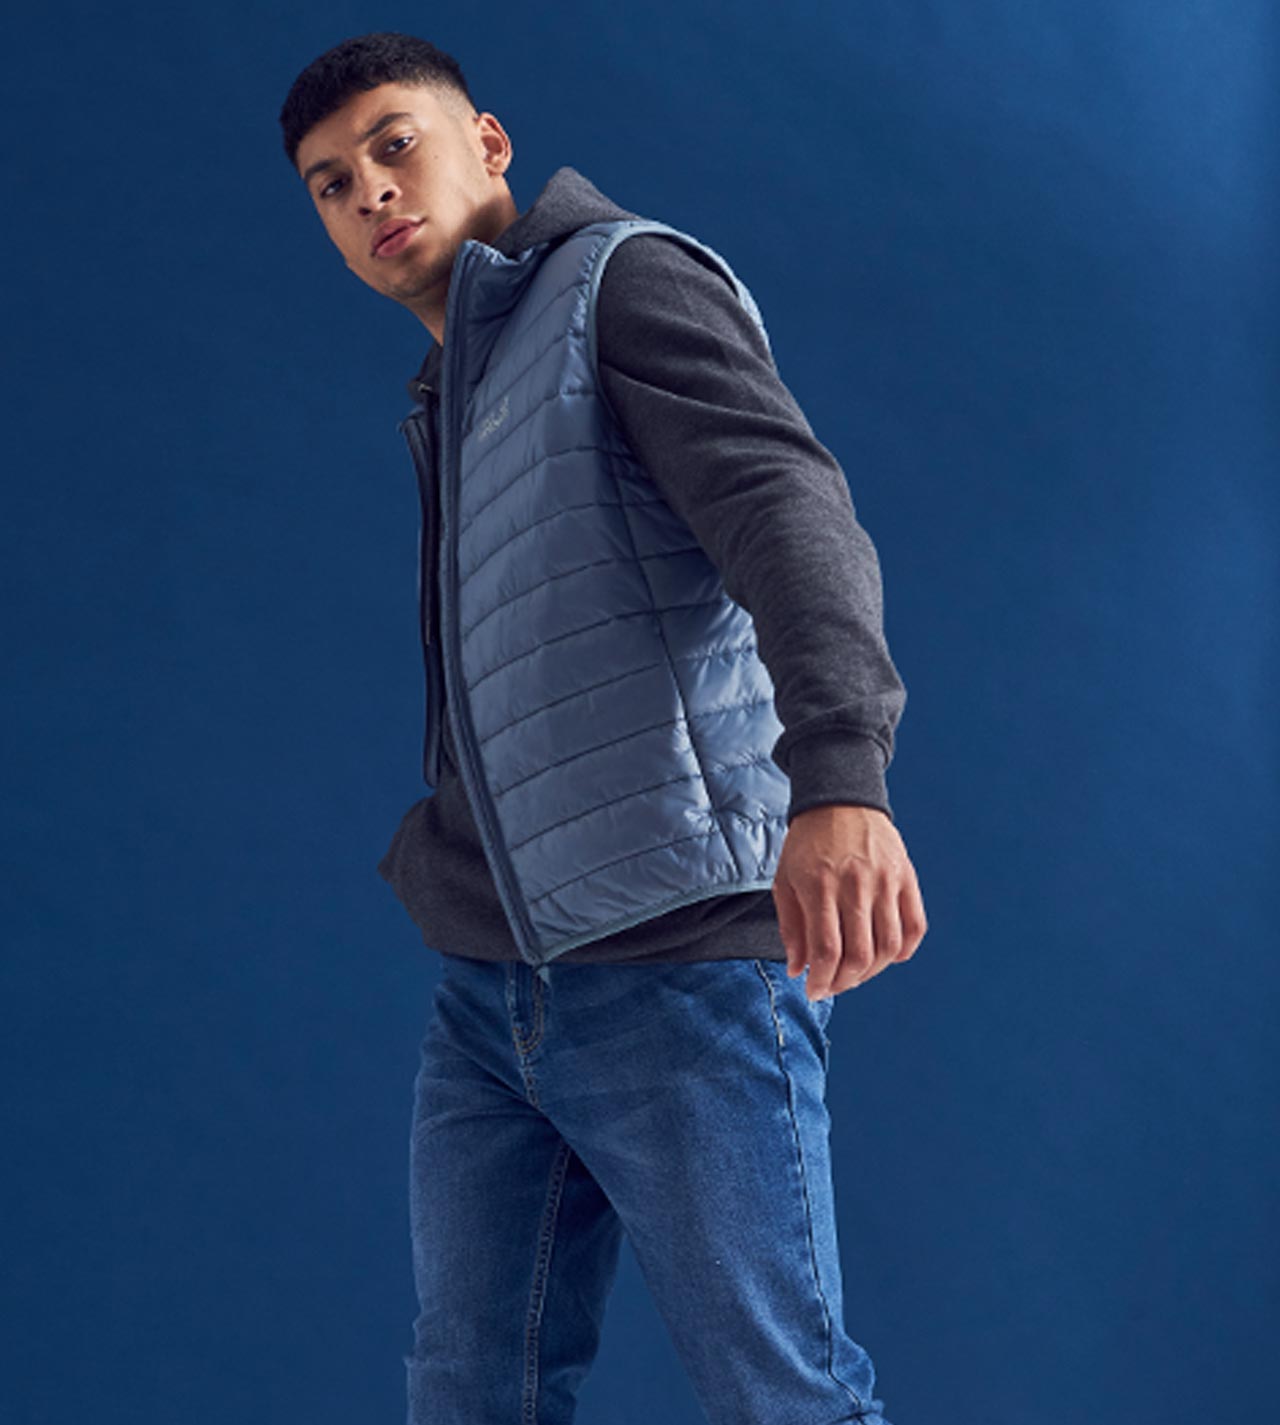 Model in Jack Wolfskin clothes